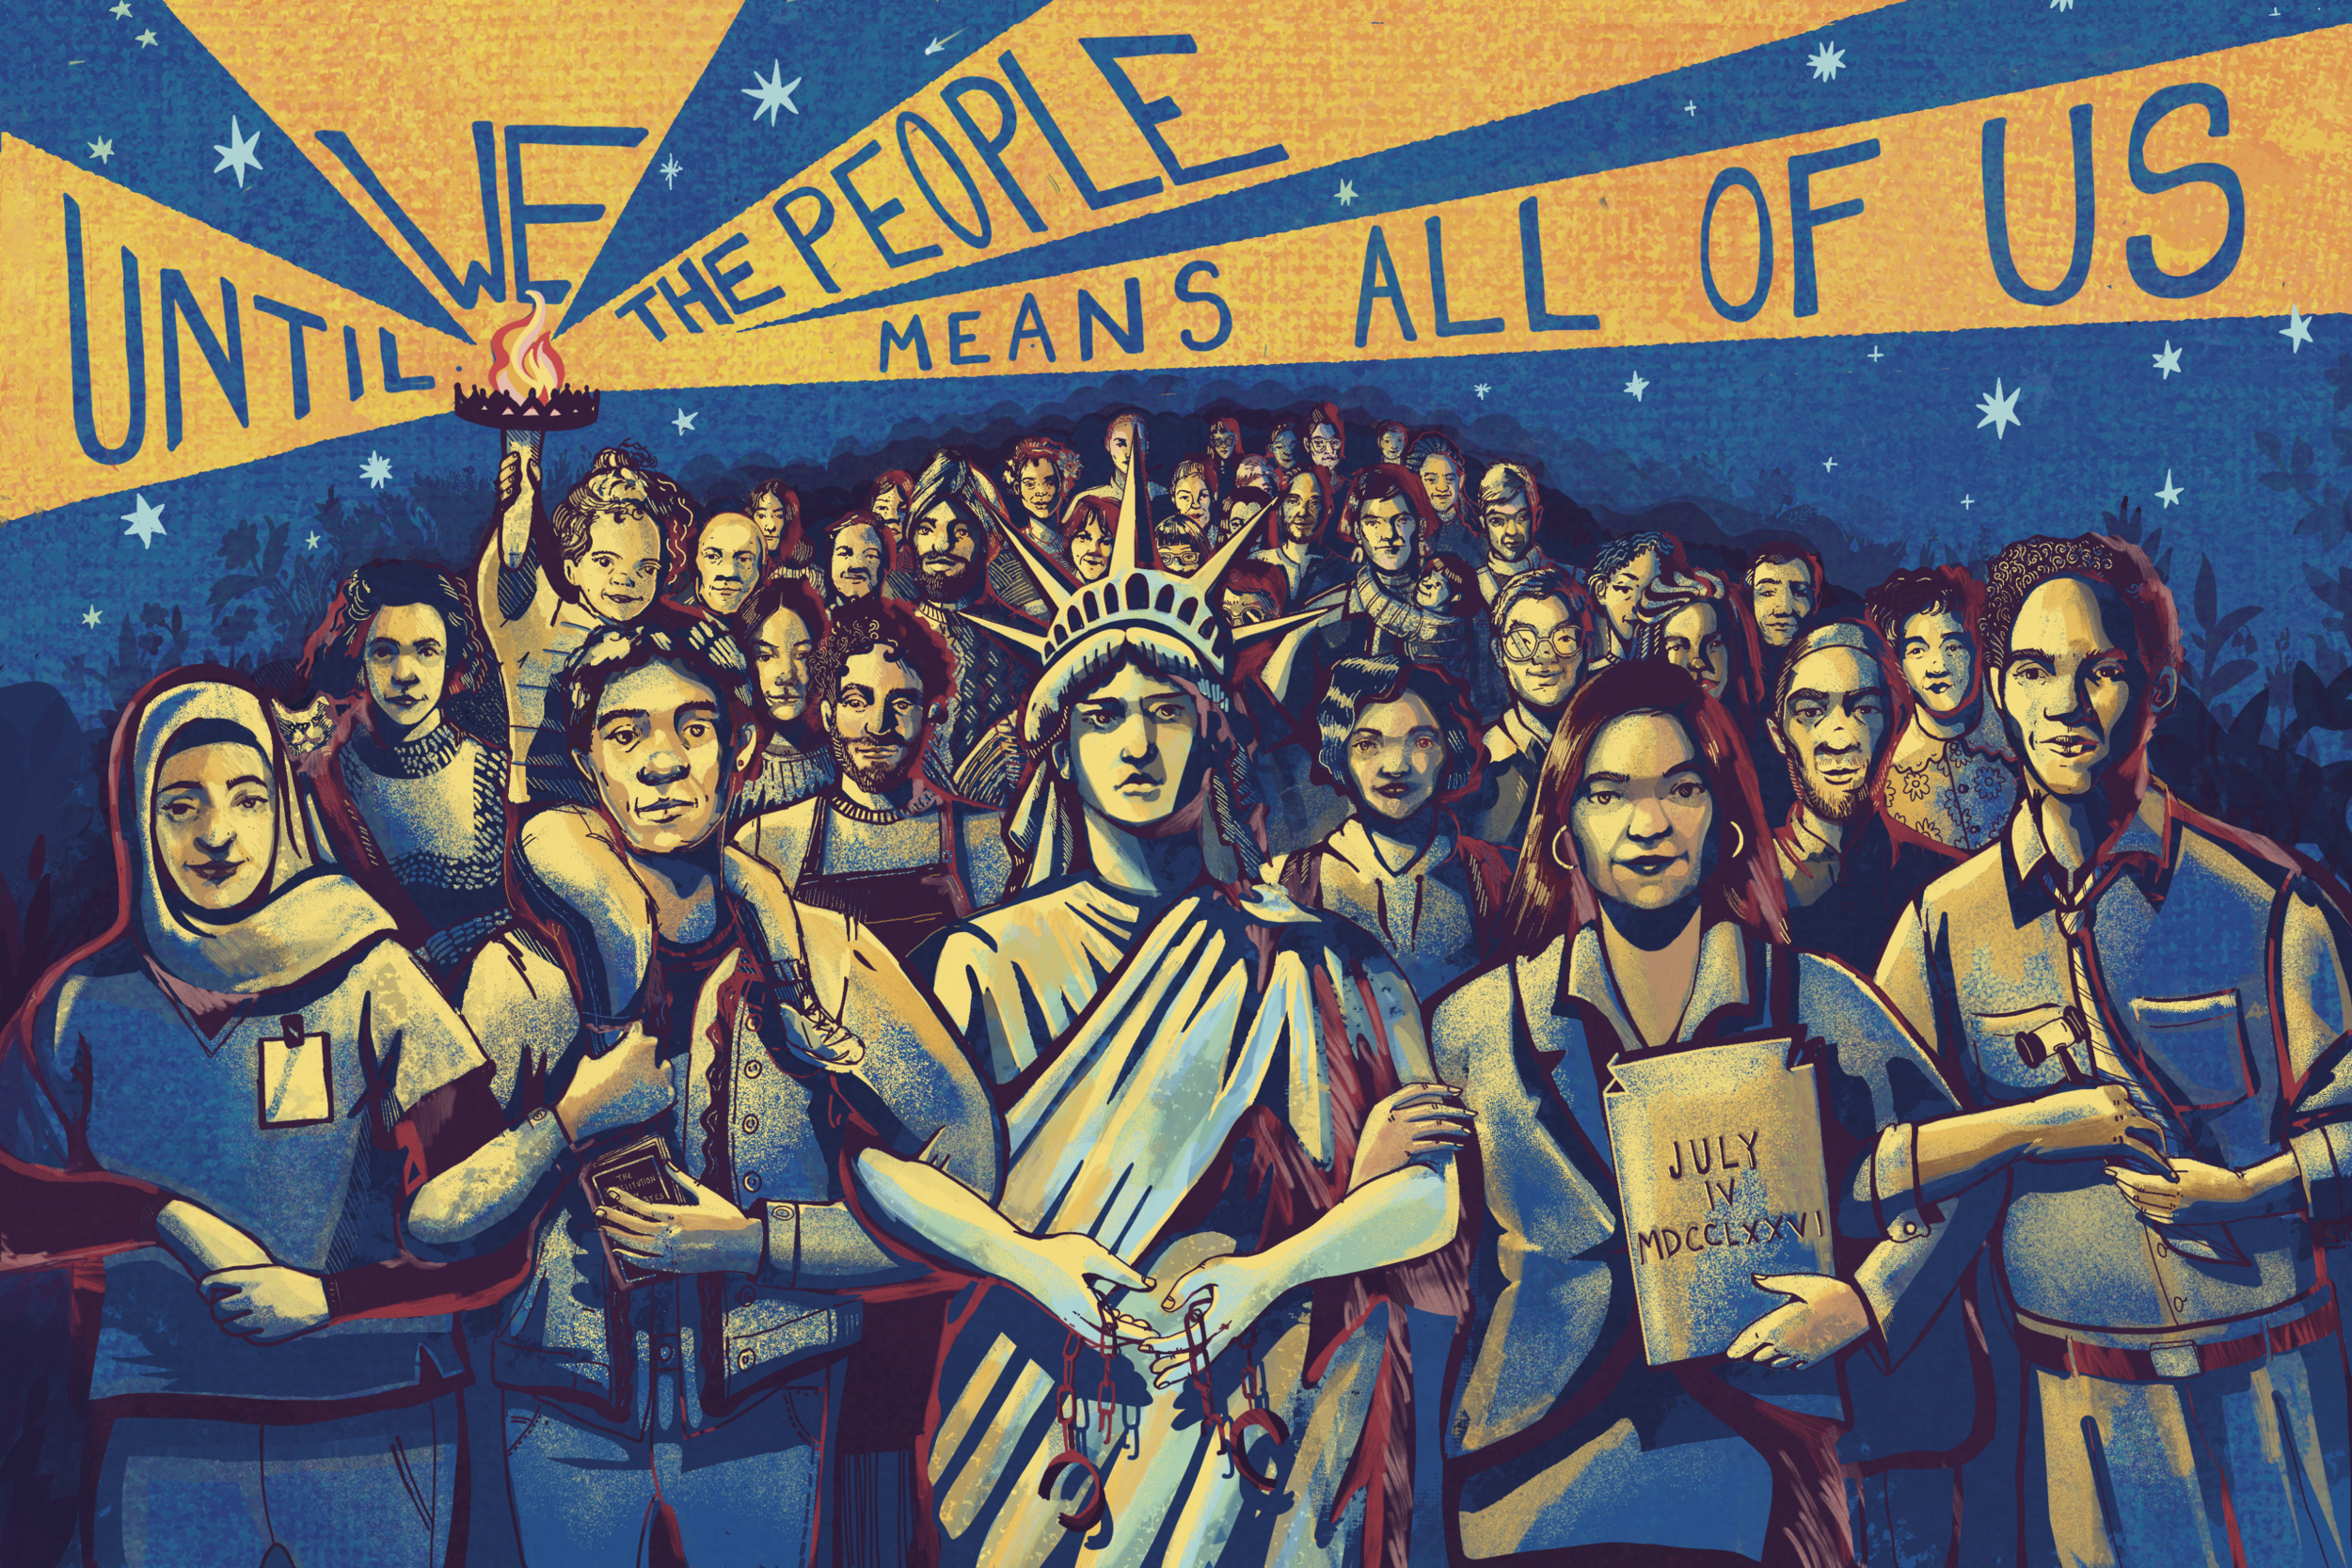  “Until We the People Means All of Us” Poster illustration made for the Special Gifts Department at the American Civil Liberties Union  Client: The American Civil Liberties Union  2020 